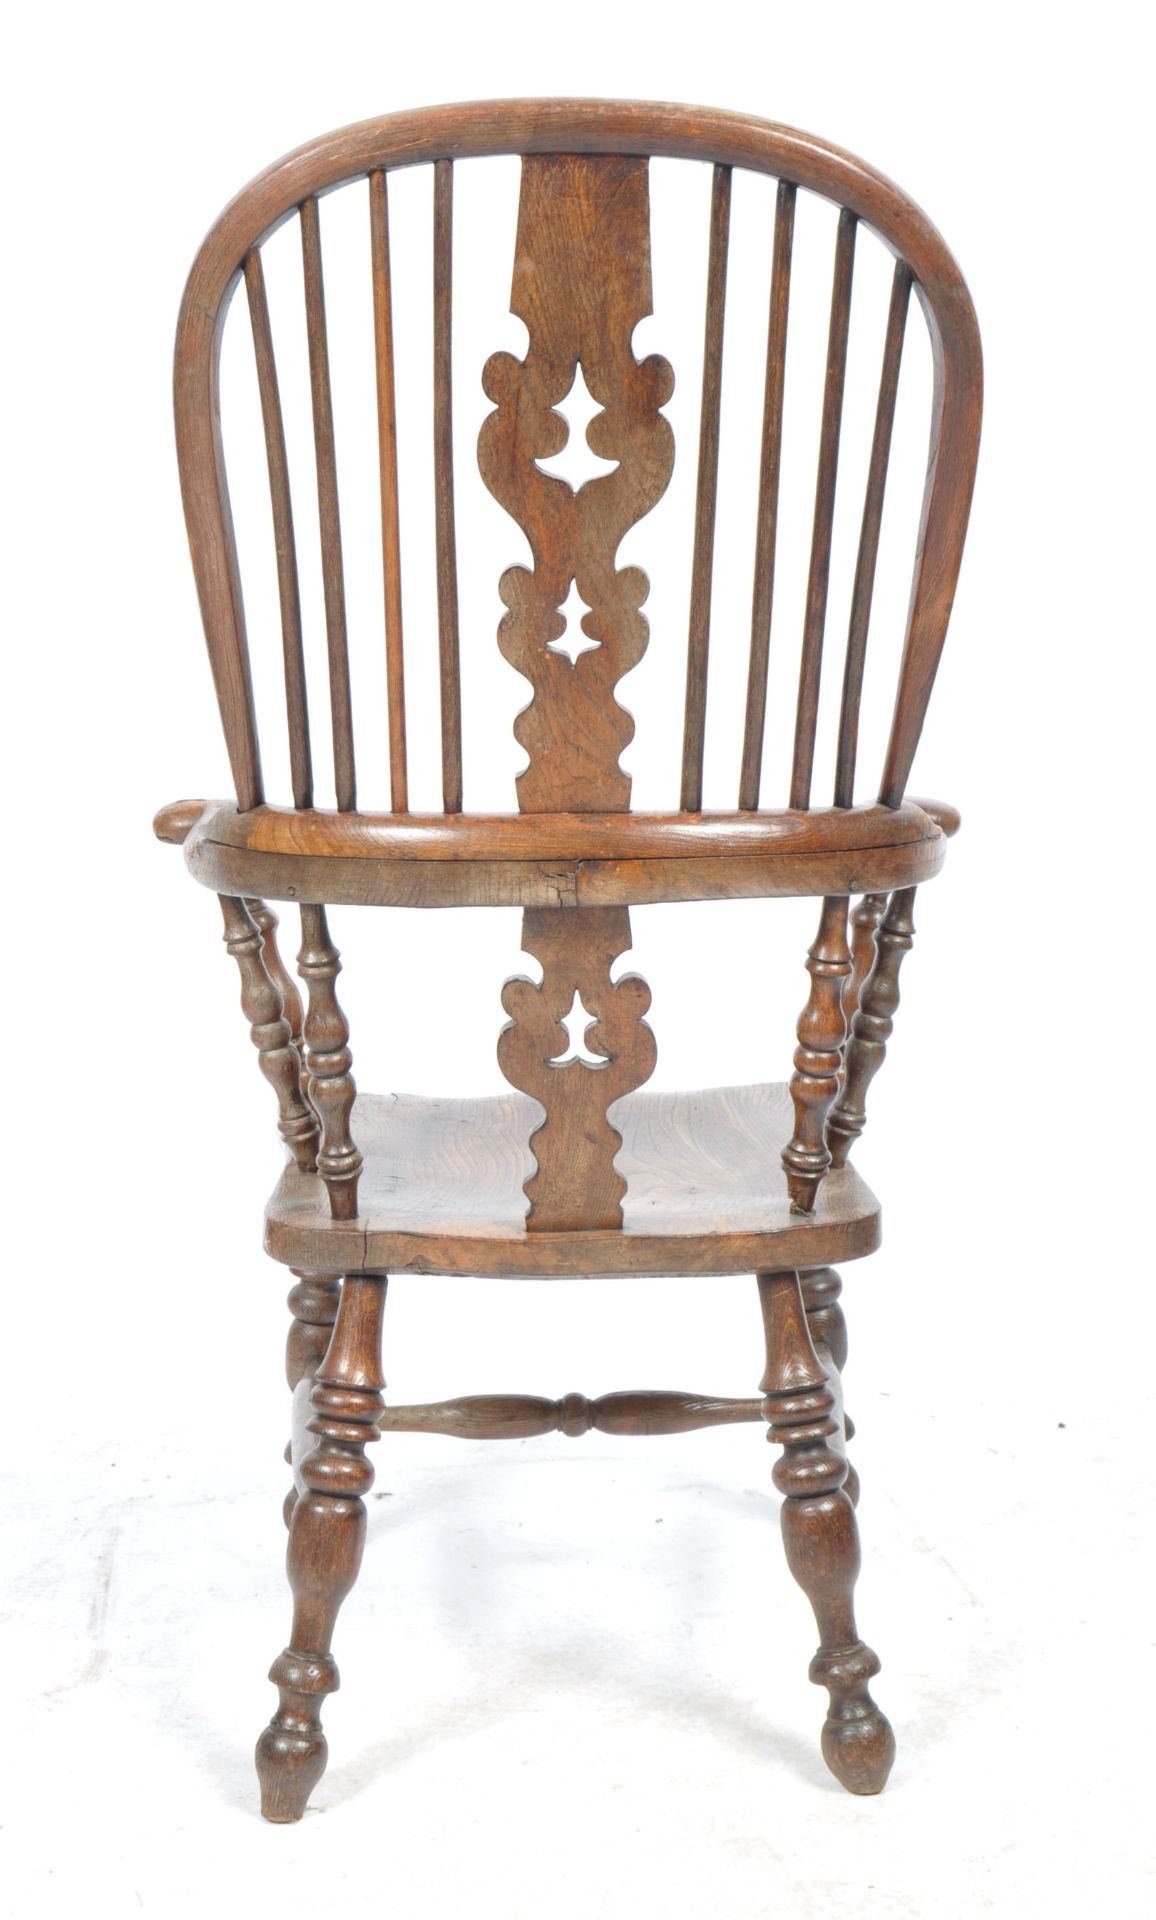 19TH CENTURY ENGLISH ANTIQUE YEW WOOD WINDSOR CARVER CHAIR - Image 5 of 6